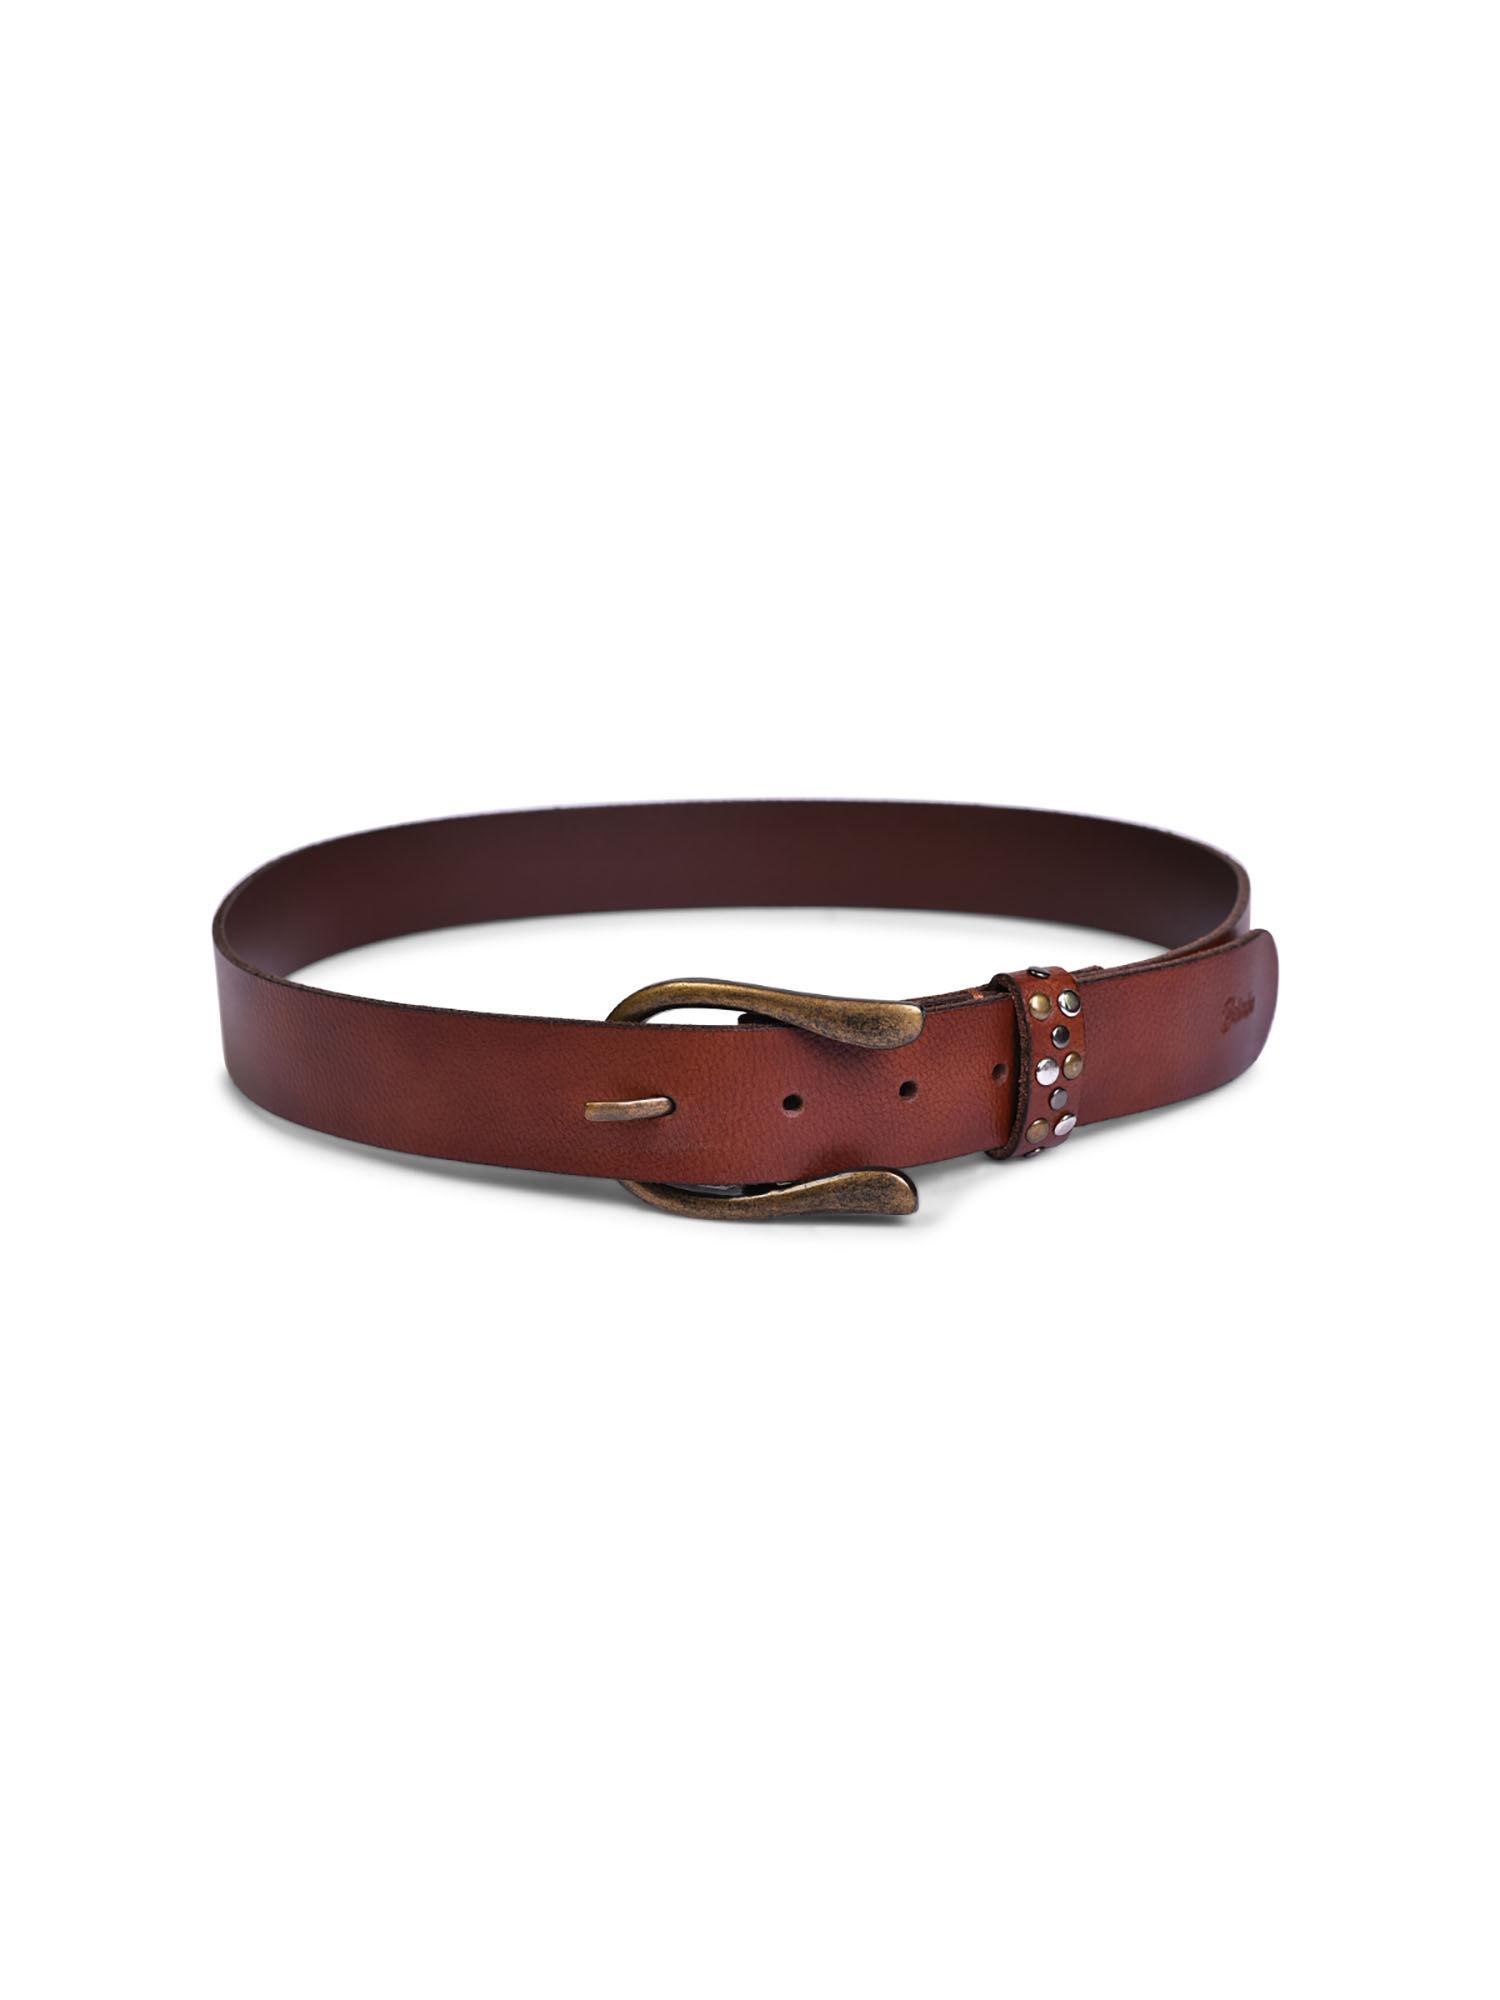 genuine leather chocolate brown mens belt with antique brass finished buckle